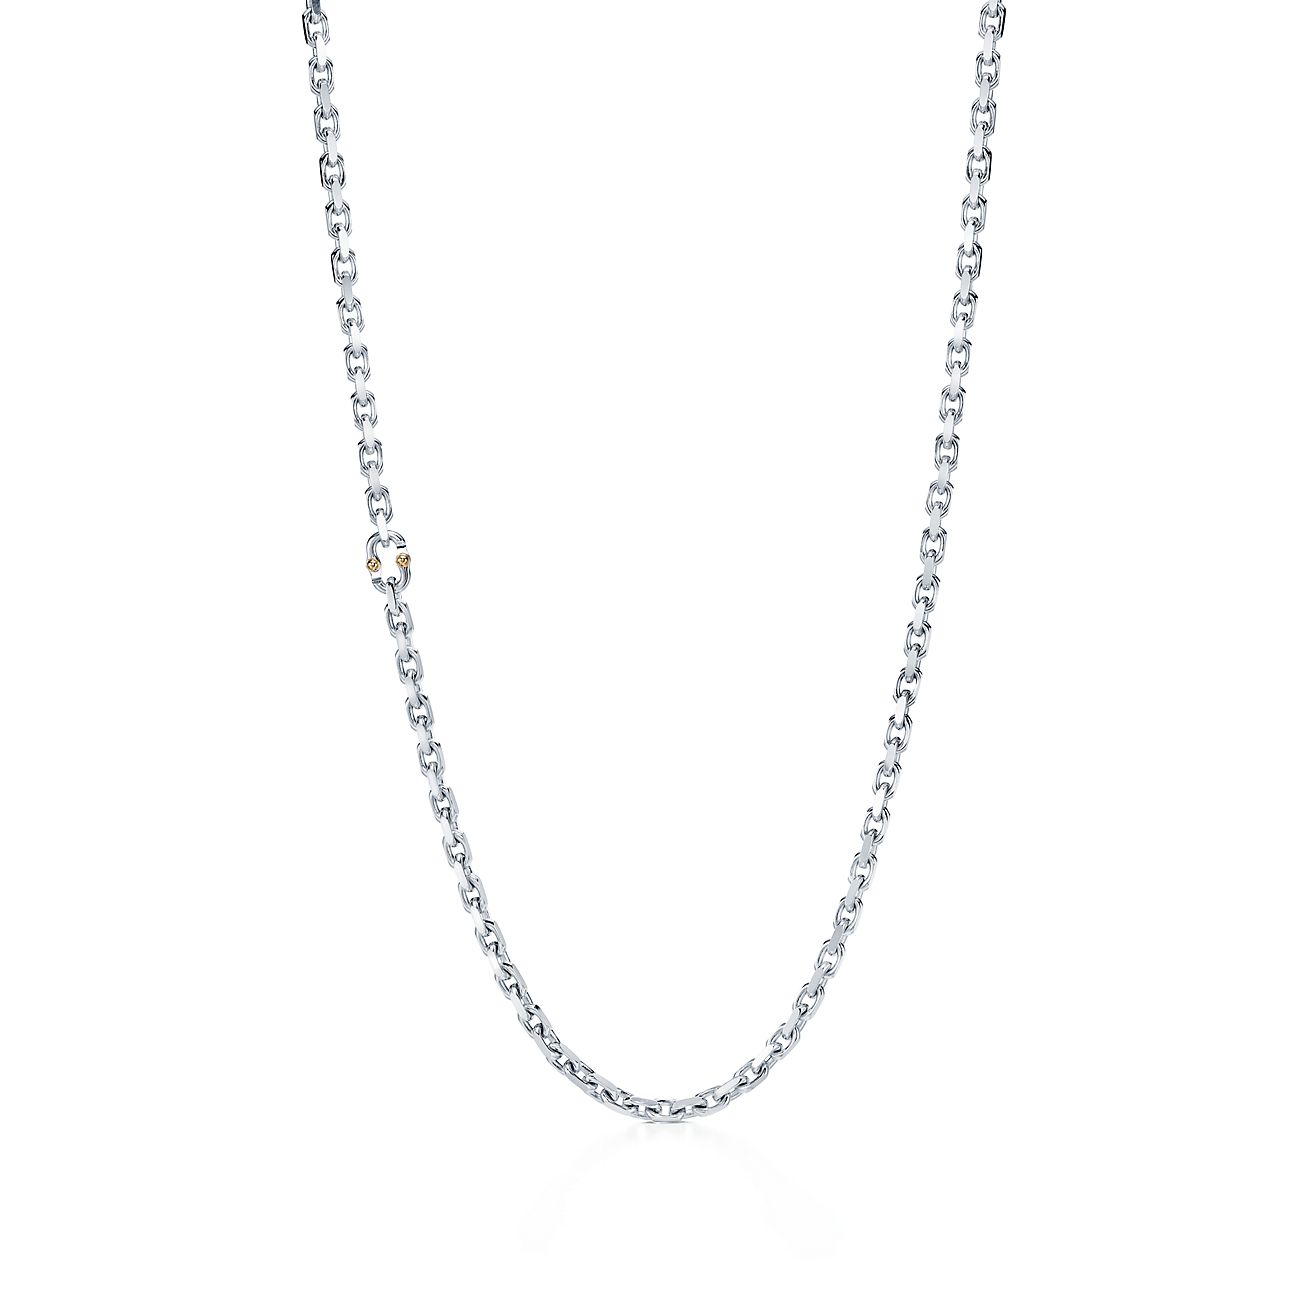 Tiffany 1837™ Makers chain necklace in sterling silver and 18k